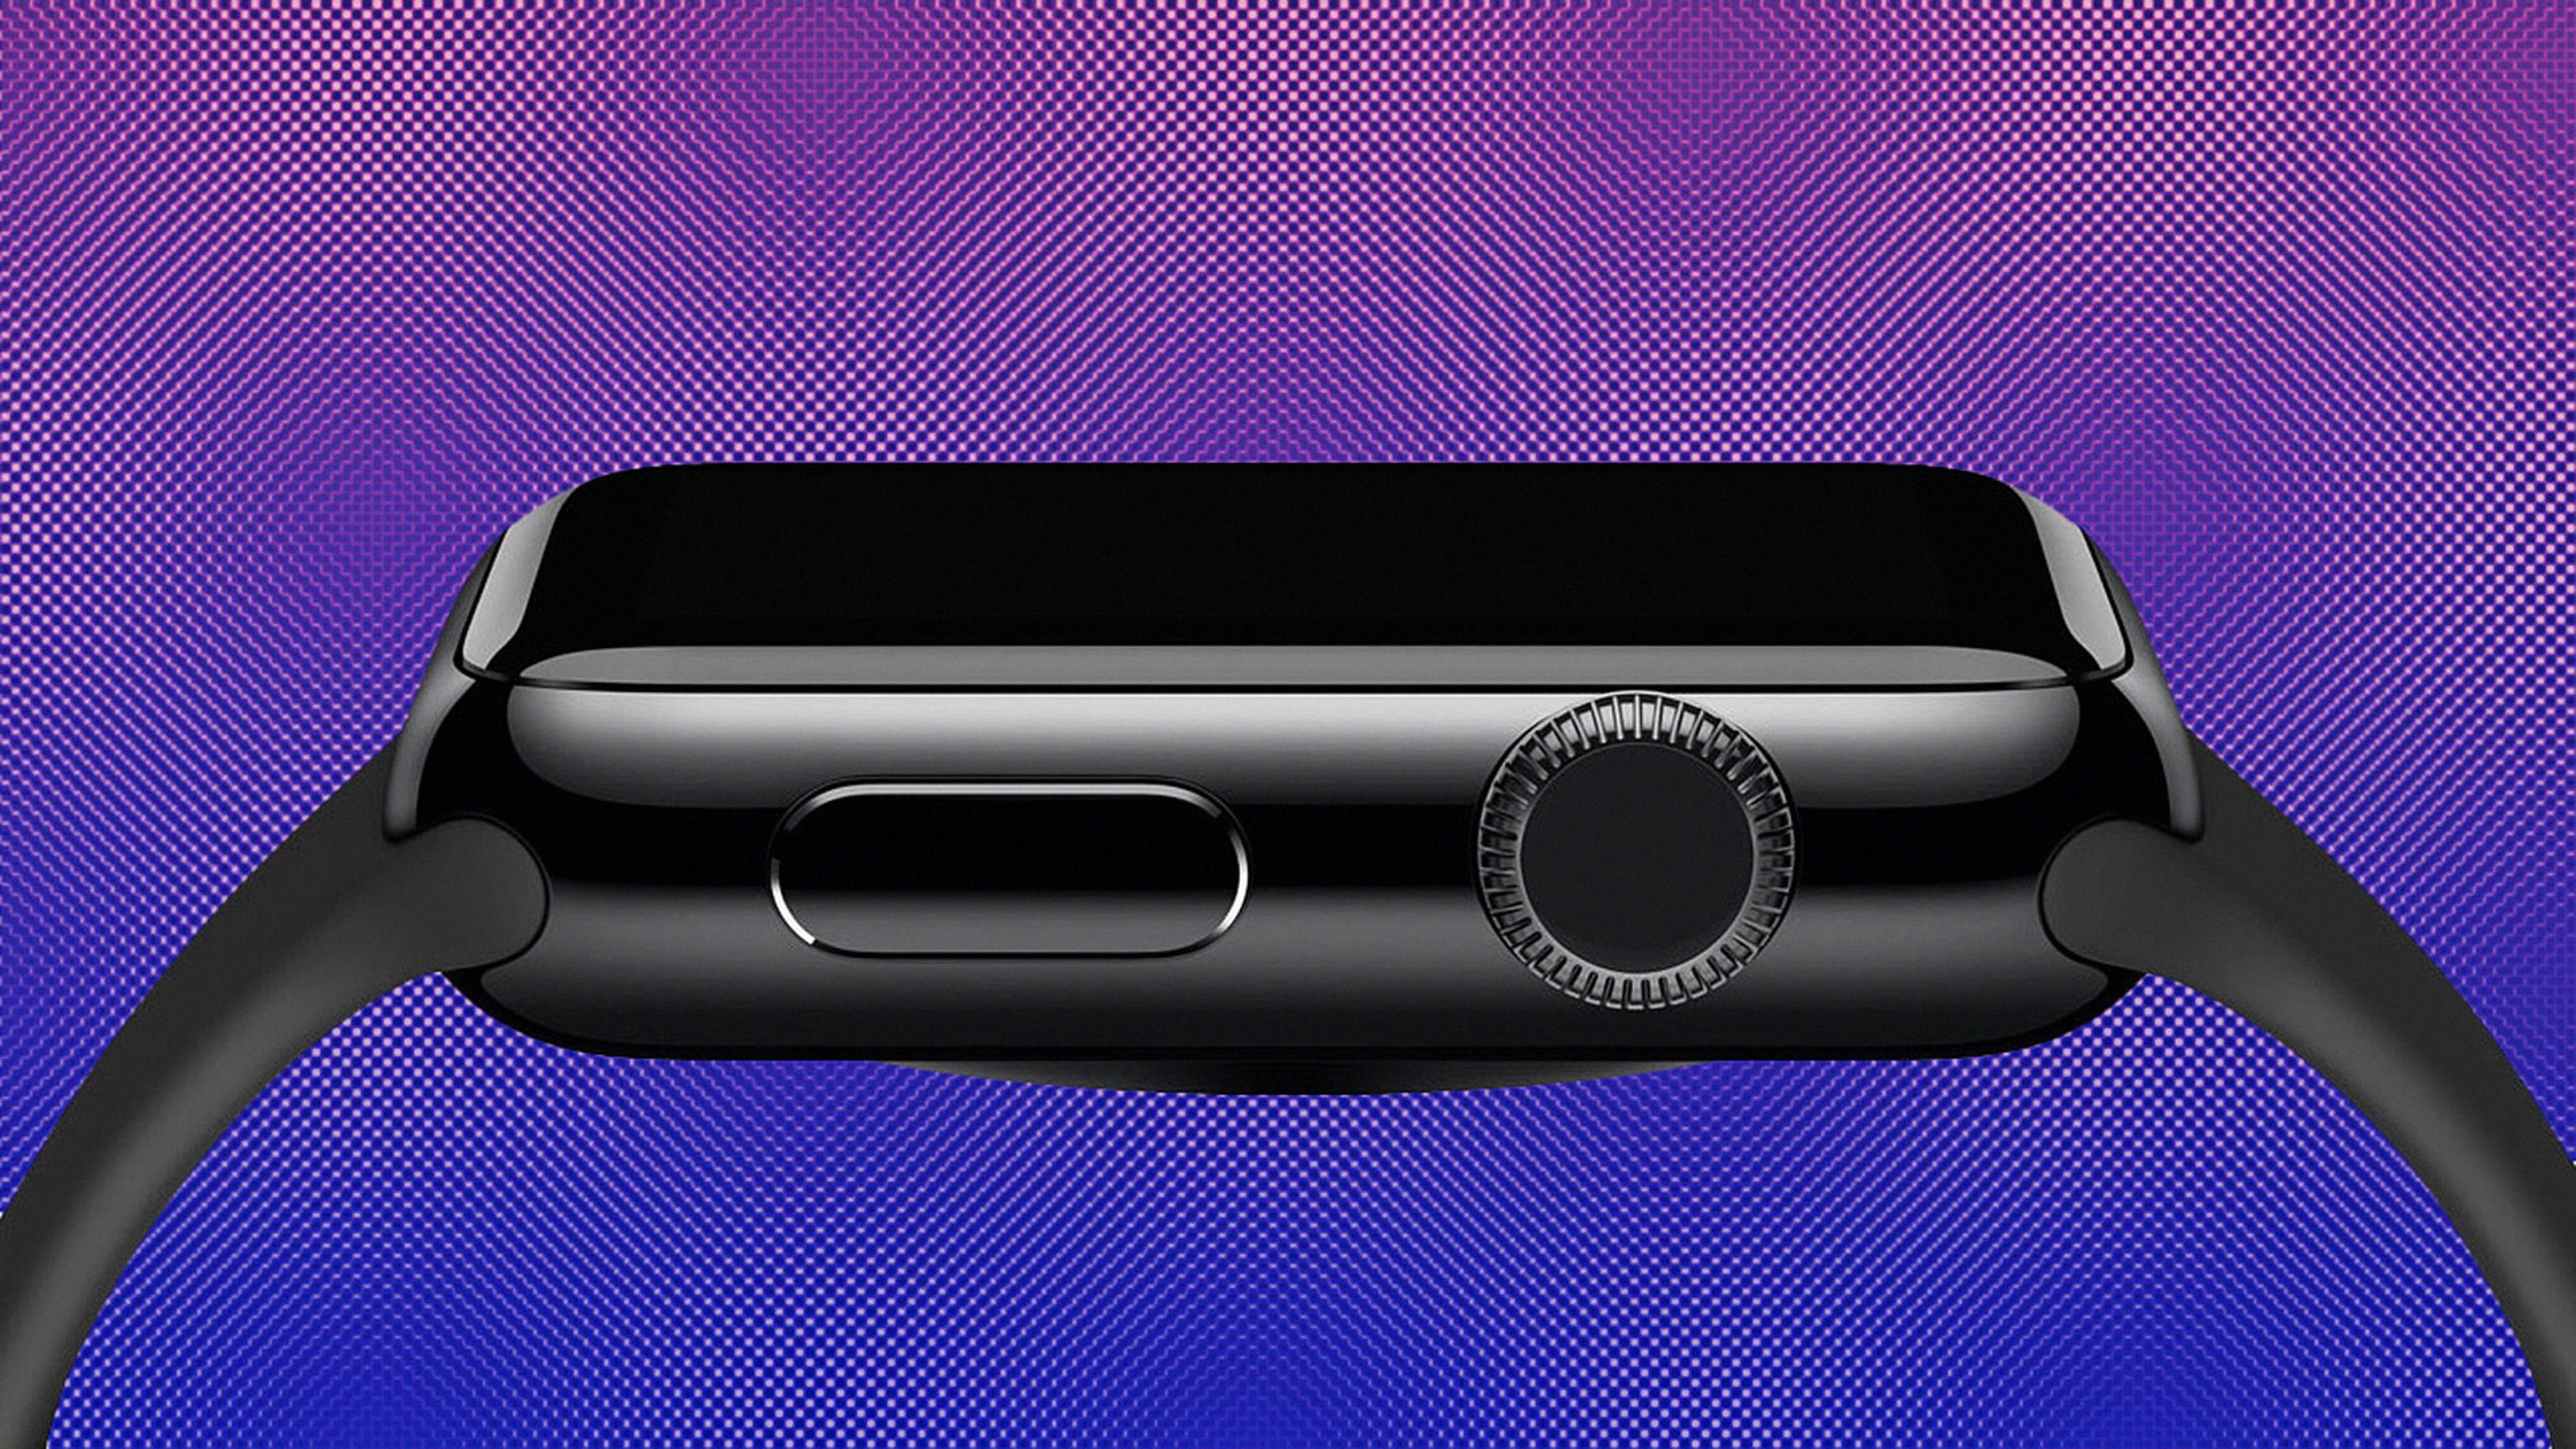 Apple Watch 2: How The World’s Best Smartwatch Might Make Its Great Leap Forward